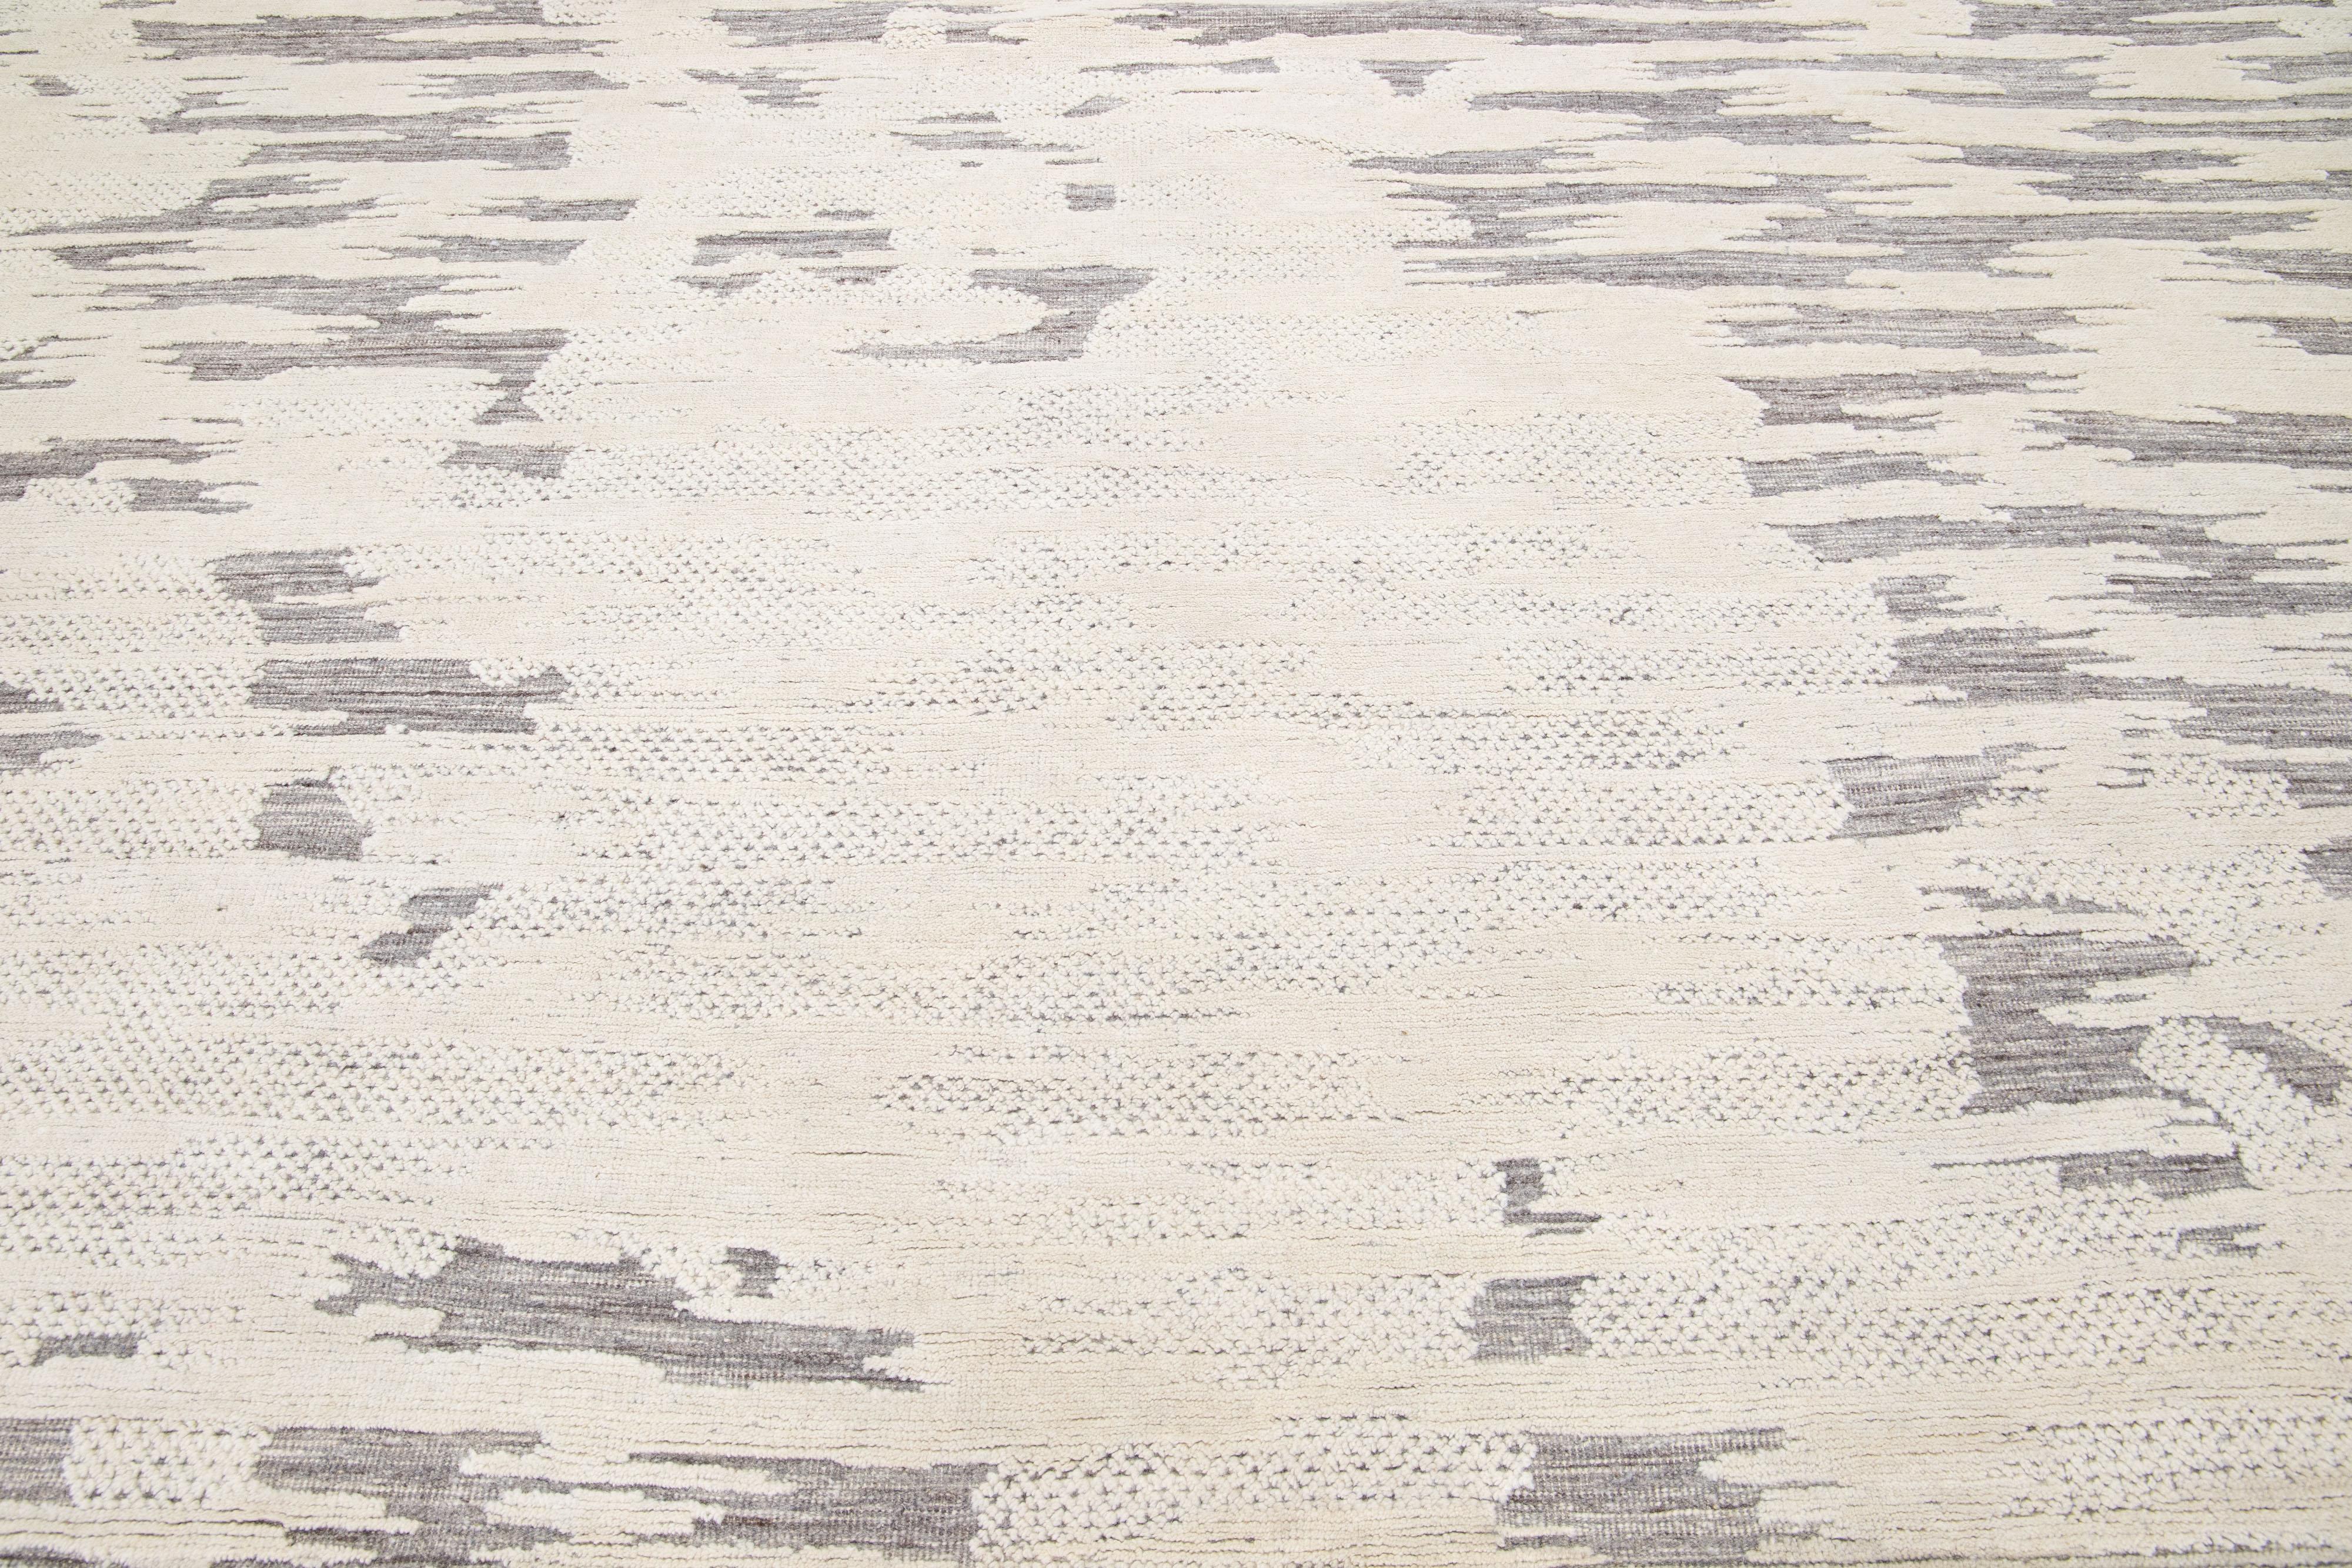 Beautiful modern Moroccan-style hand-knotted wool rug with a beige and ivory color field. This rug is part of our Apadana's Safi Collection and features a minimalist design in gray.

This rug measures: 10'3